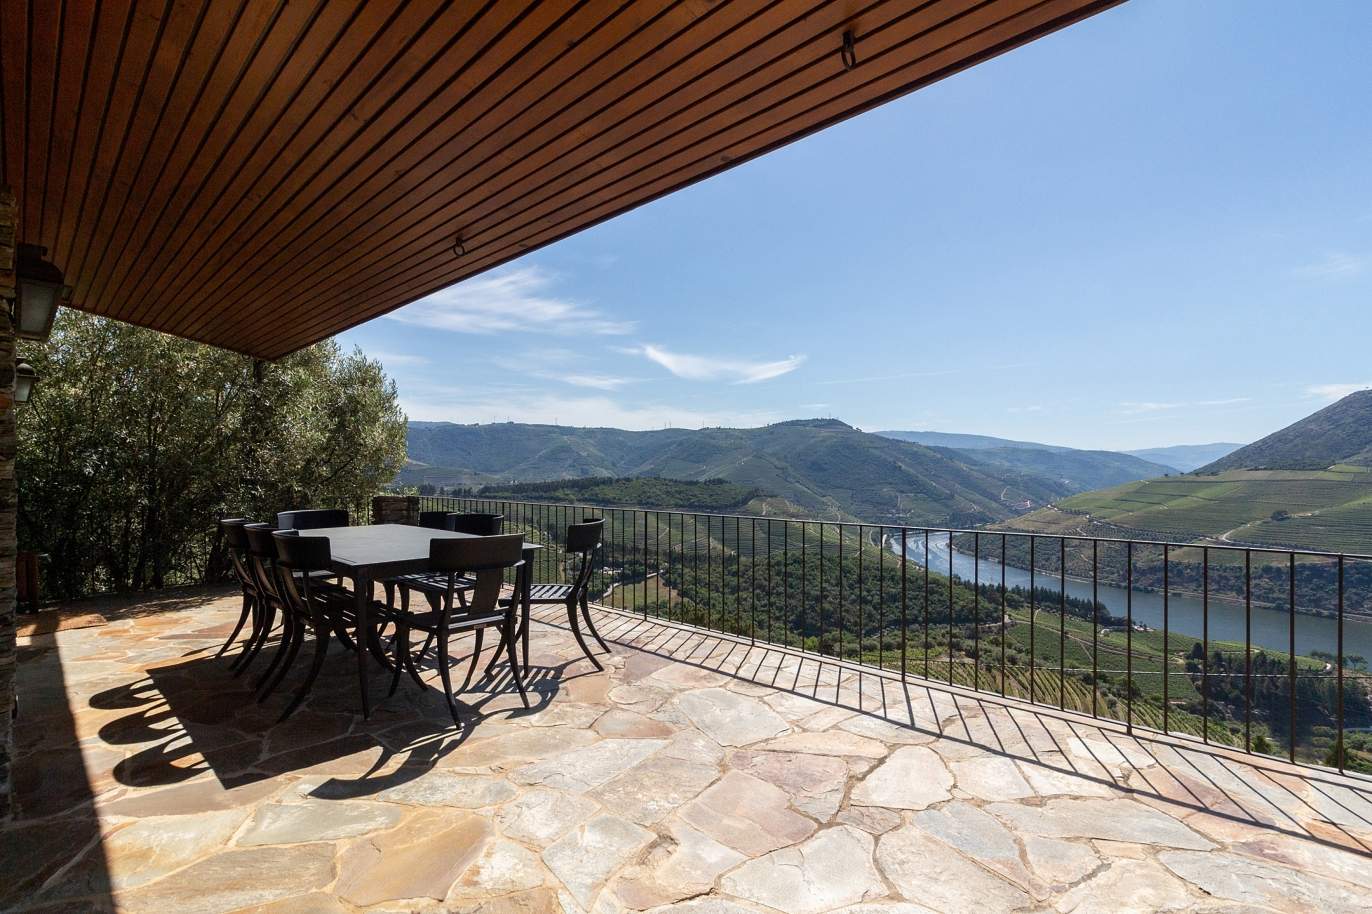 Sale country house in vineyard w/ river views, Douro Valley, Portugal_171499